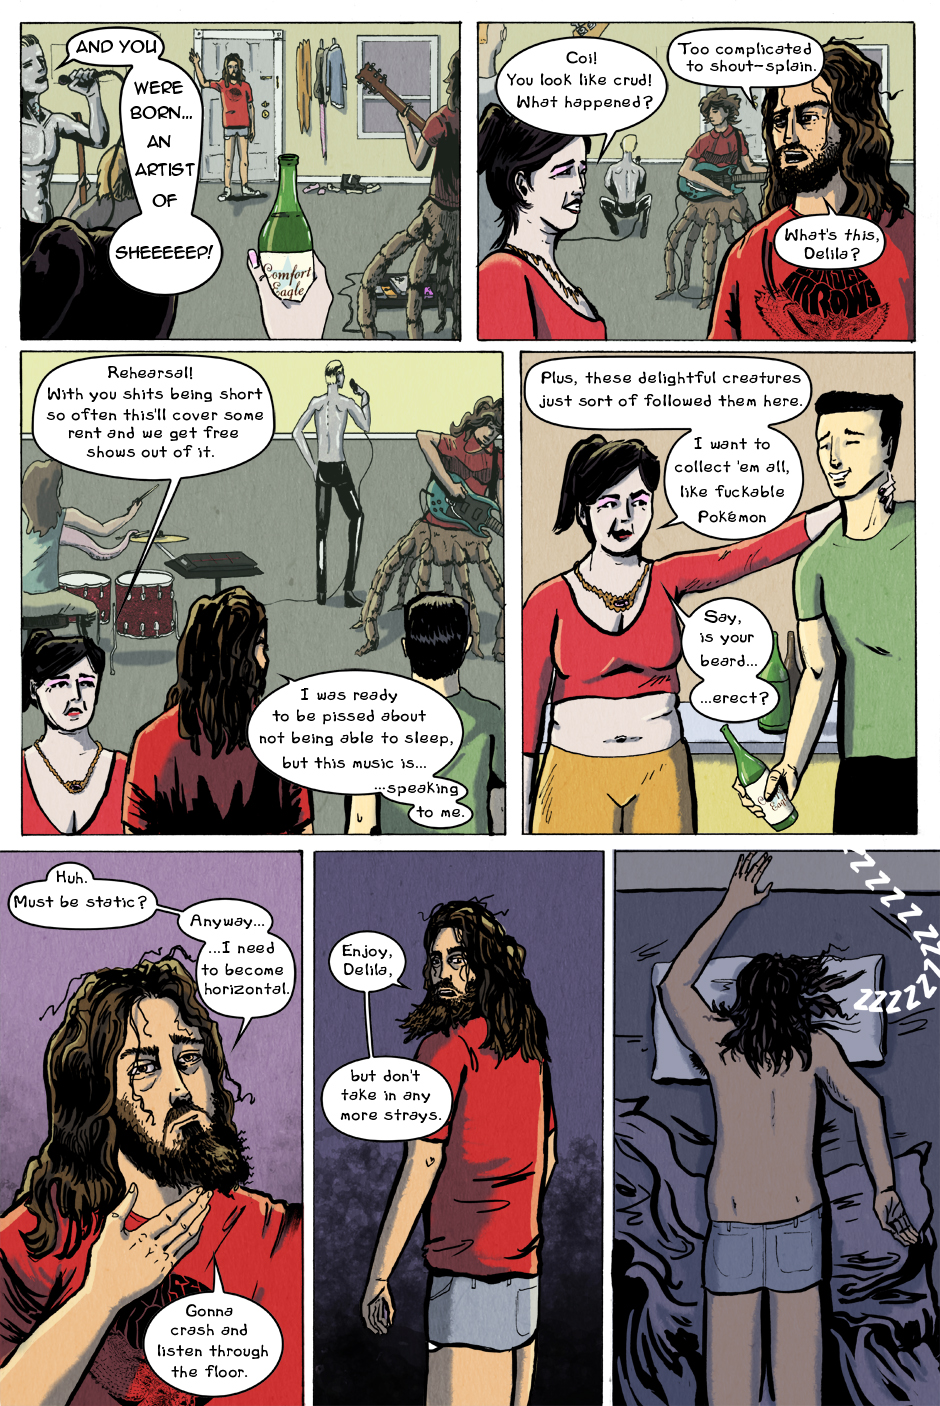 Issue Two - Page Seven